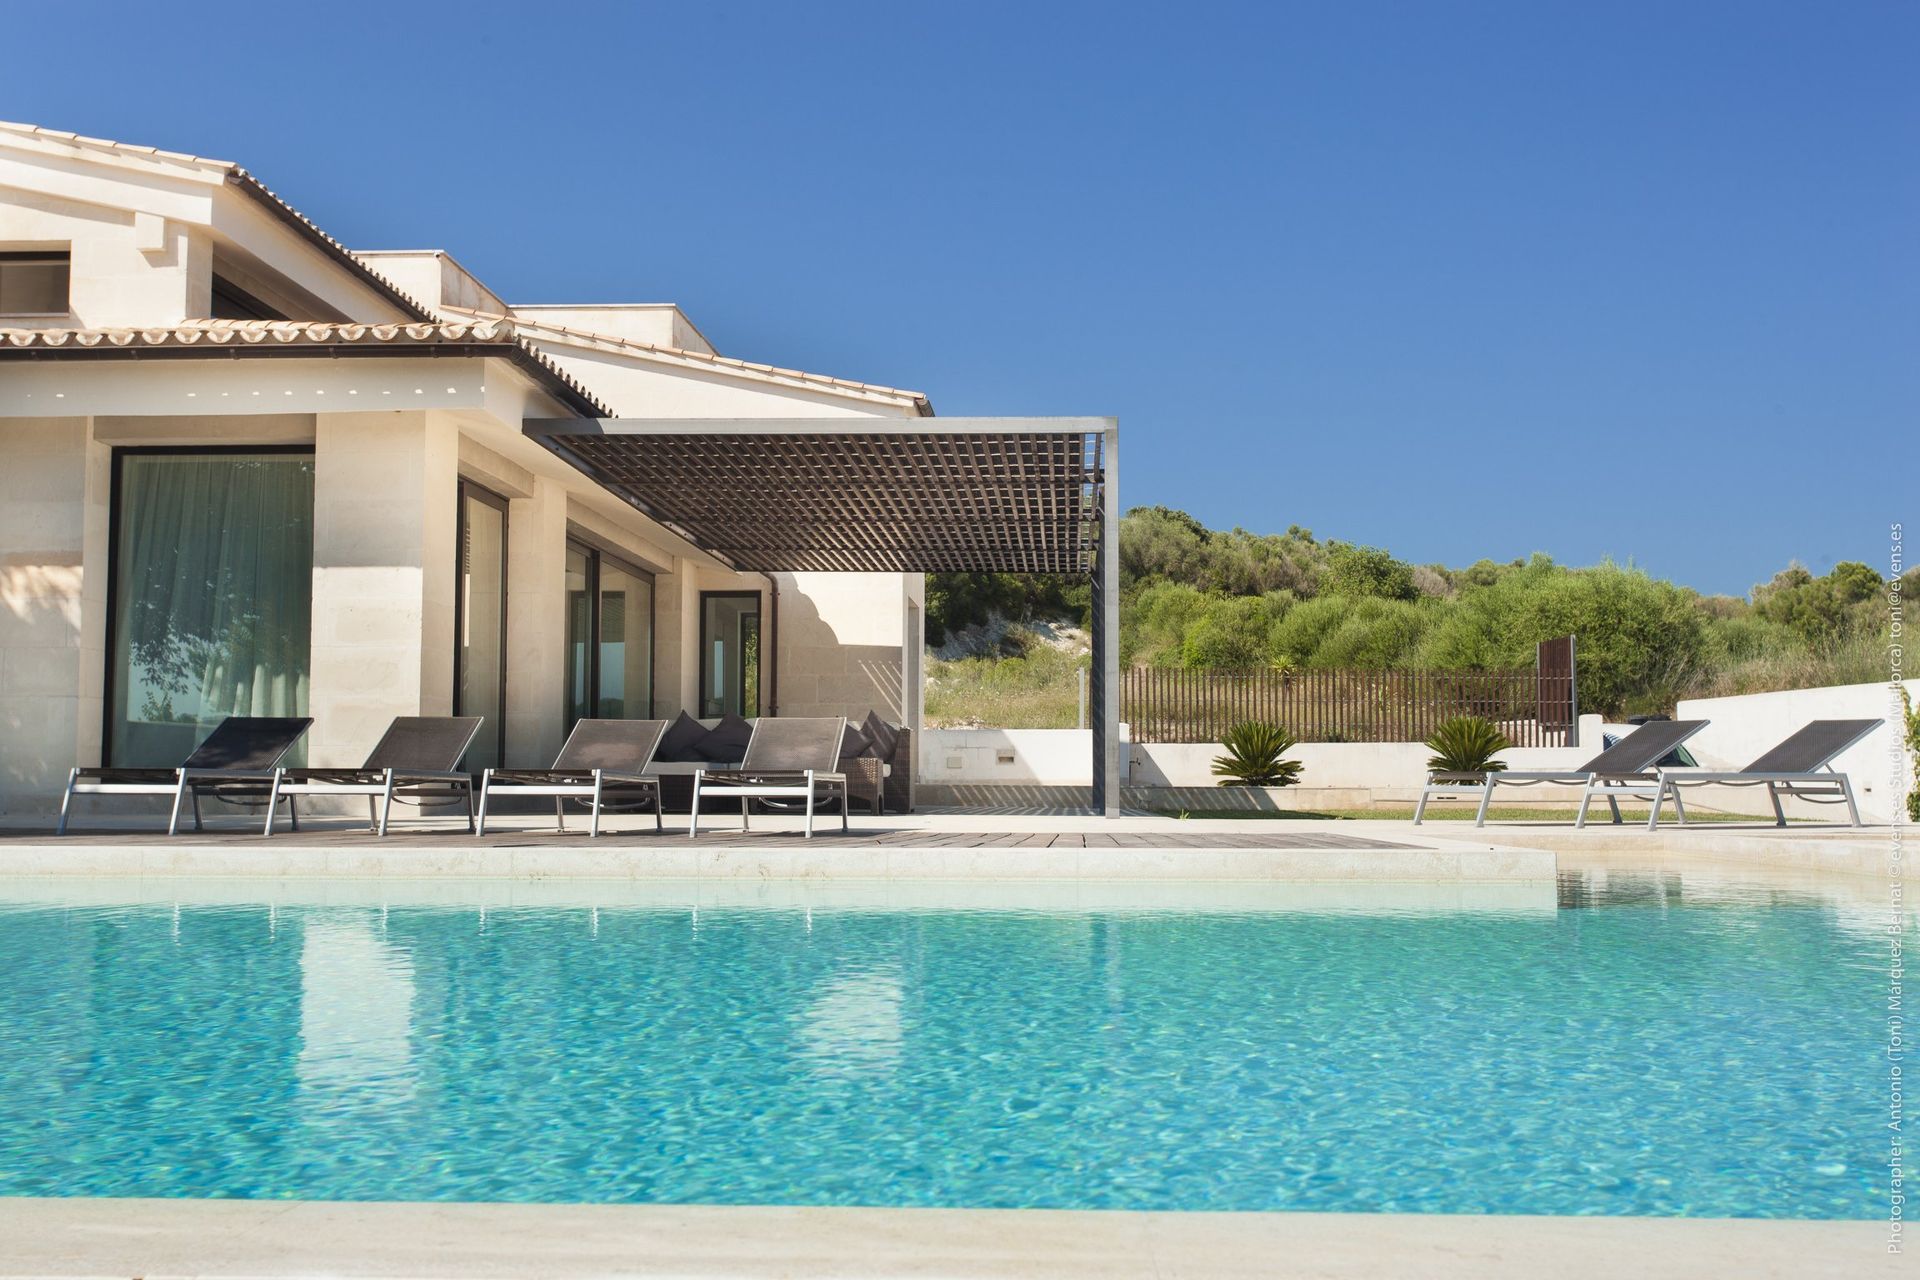 A peaceful villa oasis in Majorca's countryside, with 4 bedrooms and a private pool